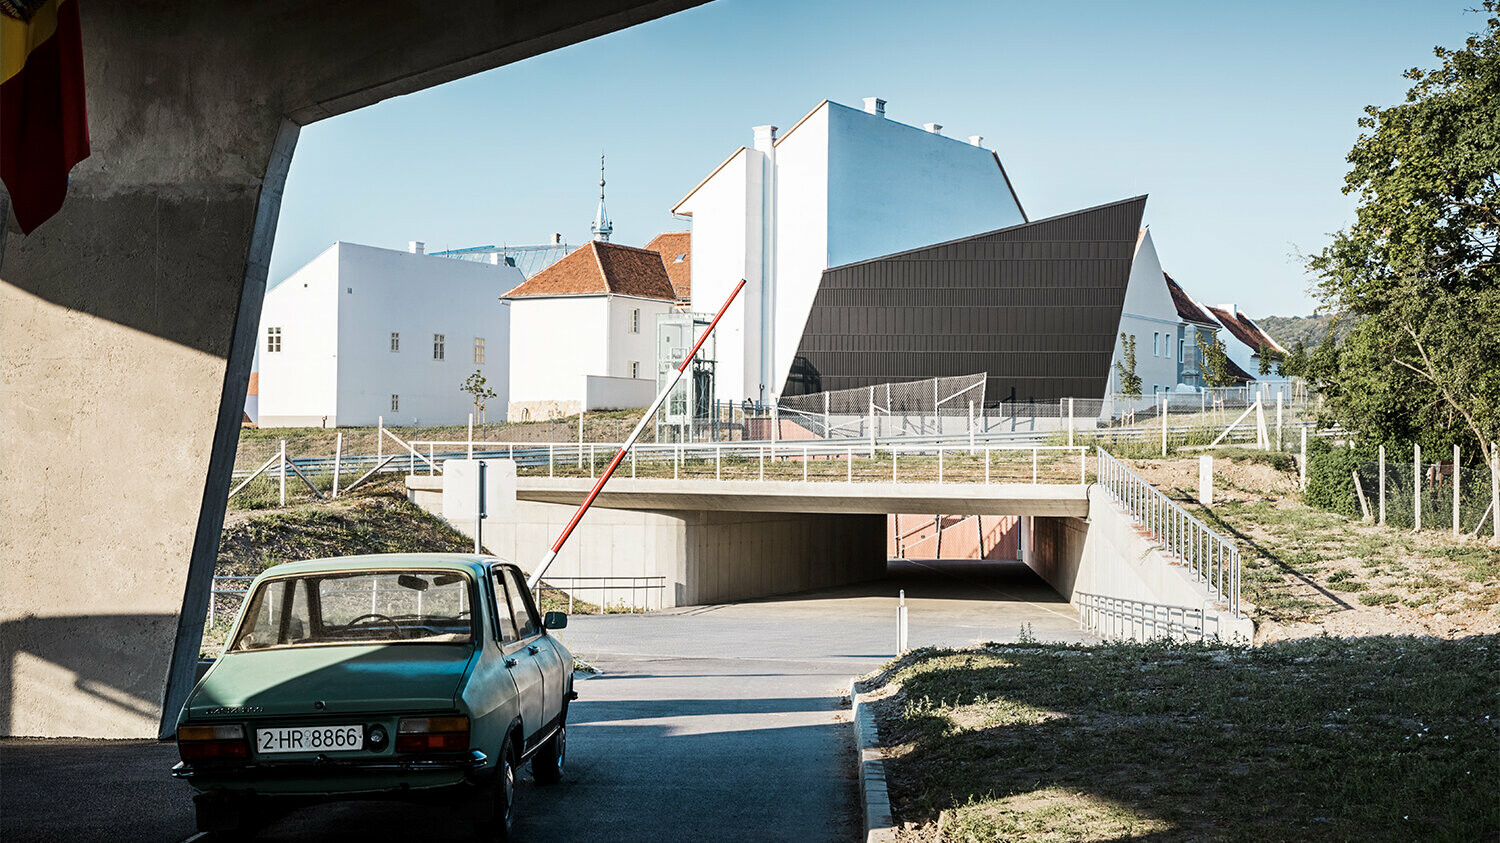 Side view of part of the open air museum inlcuding the cinema pavilion, a car in the lower left-hand corner of the photo is driving through the entrance in front of it.